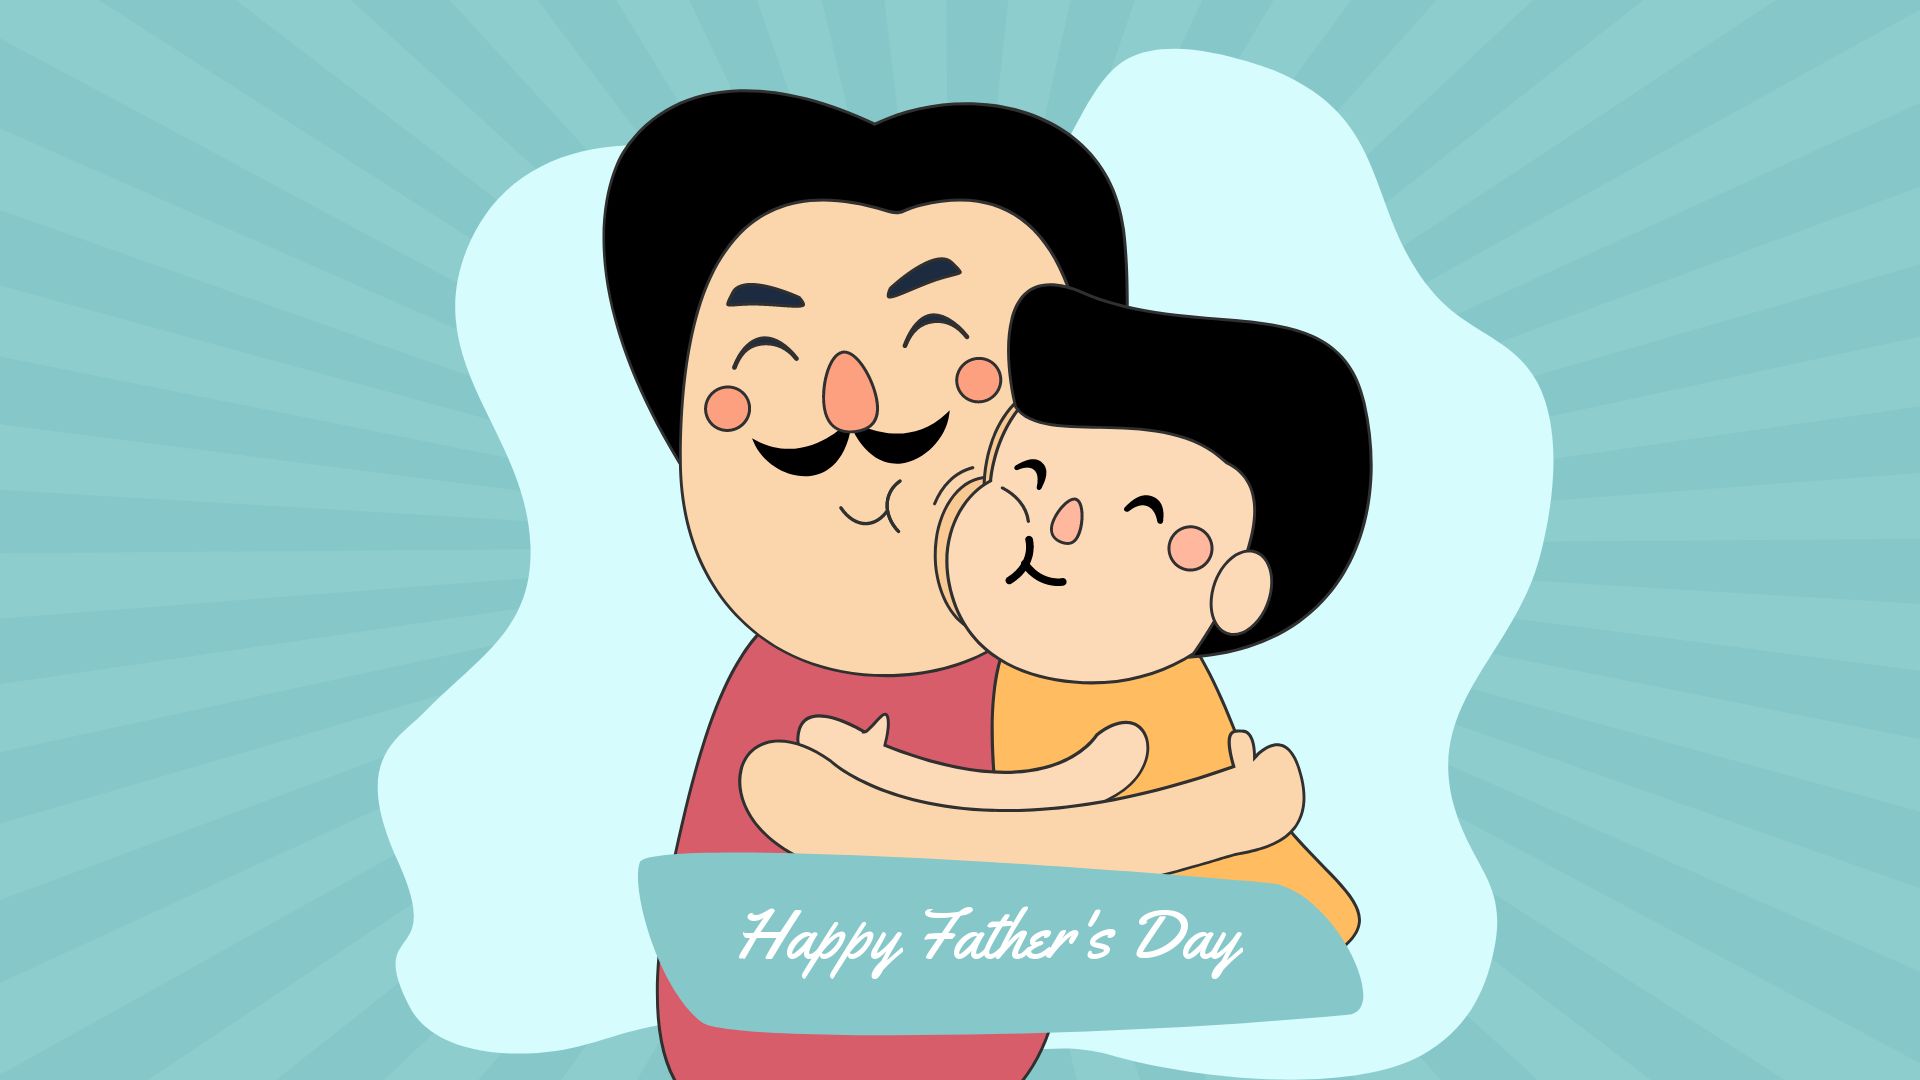 Cartoon Happy Father's Day Image